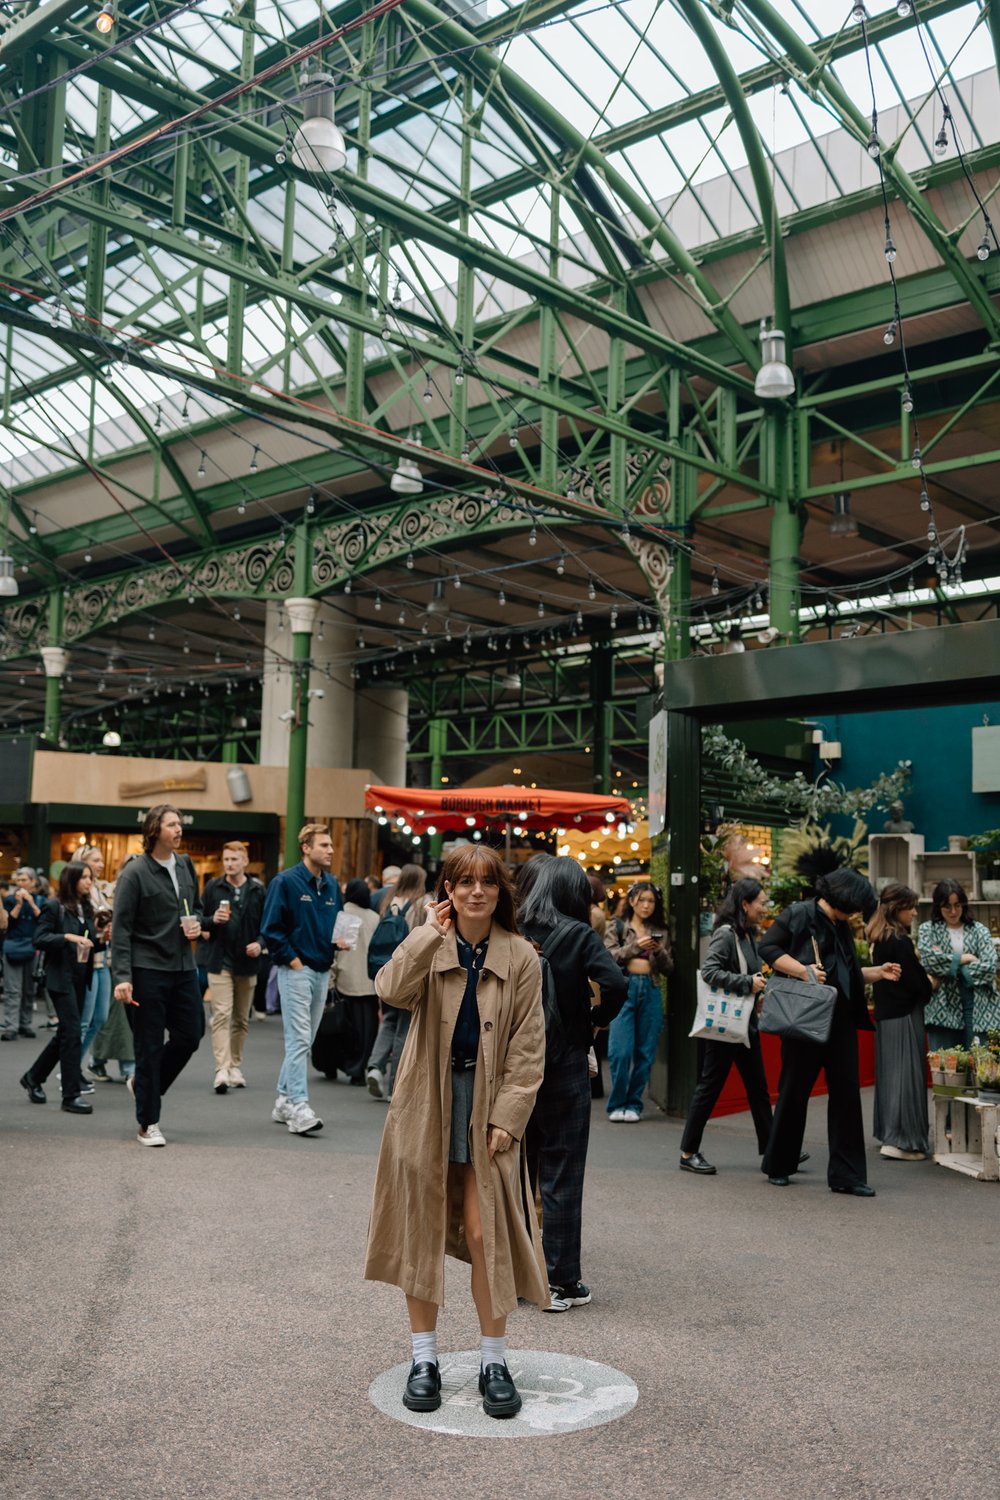 Borough Market food is a must-do in London